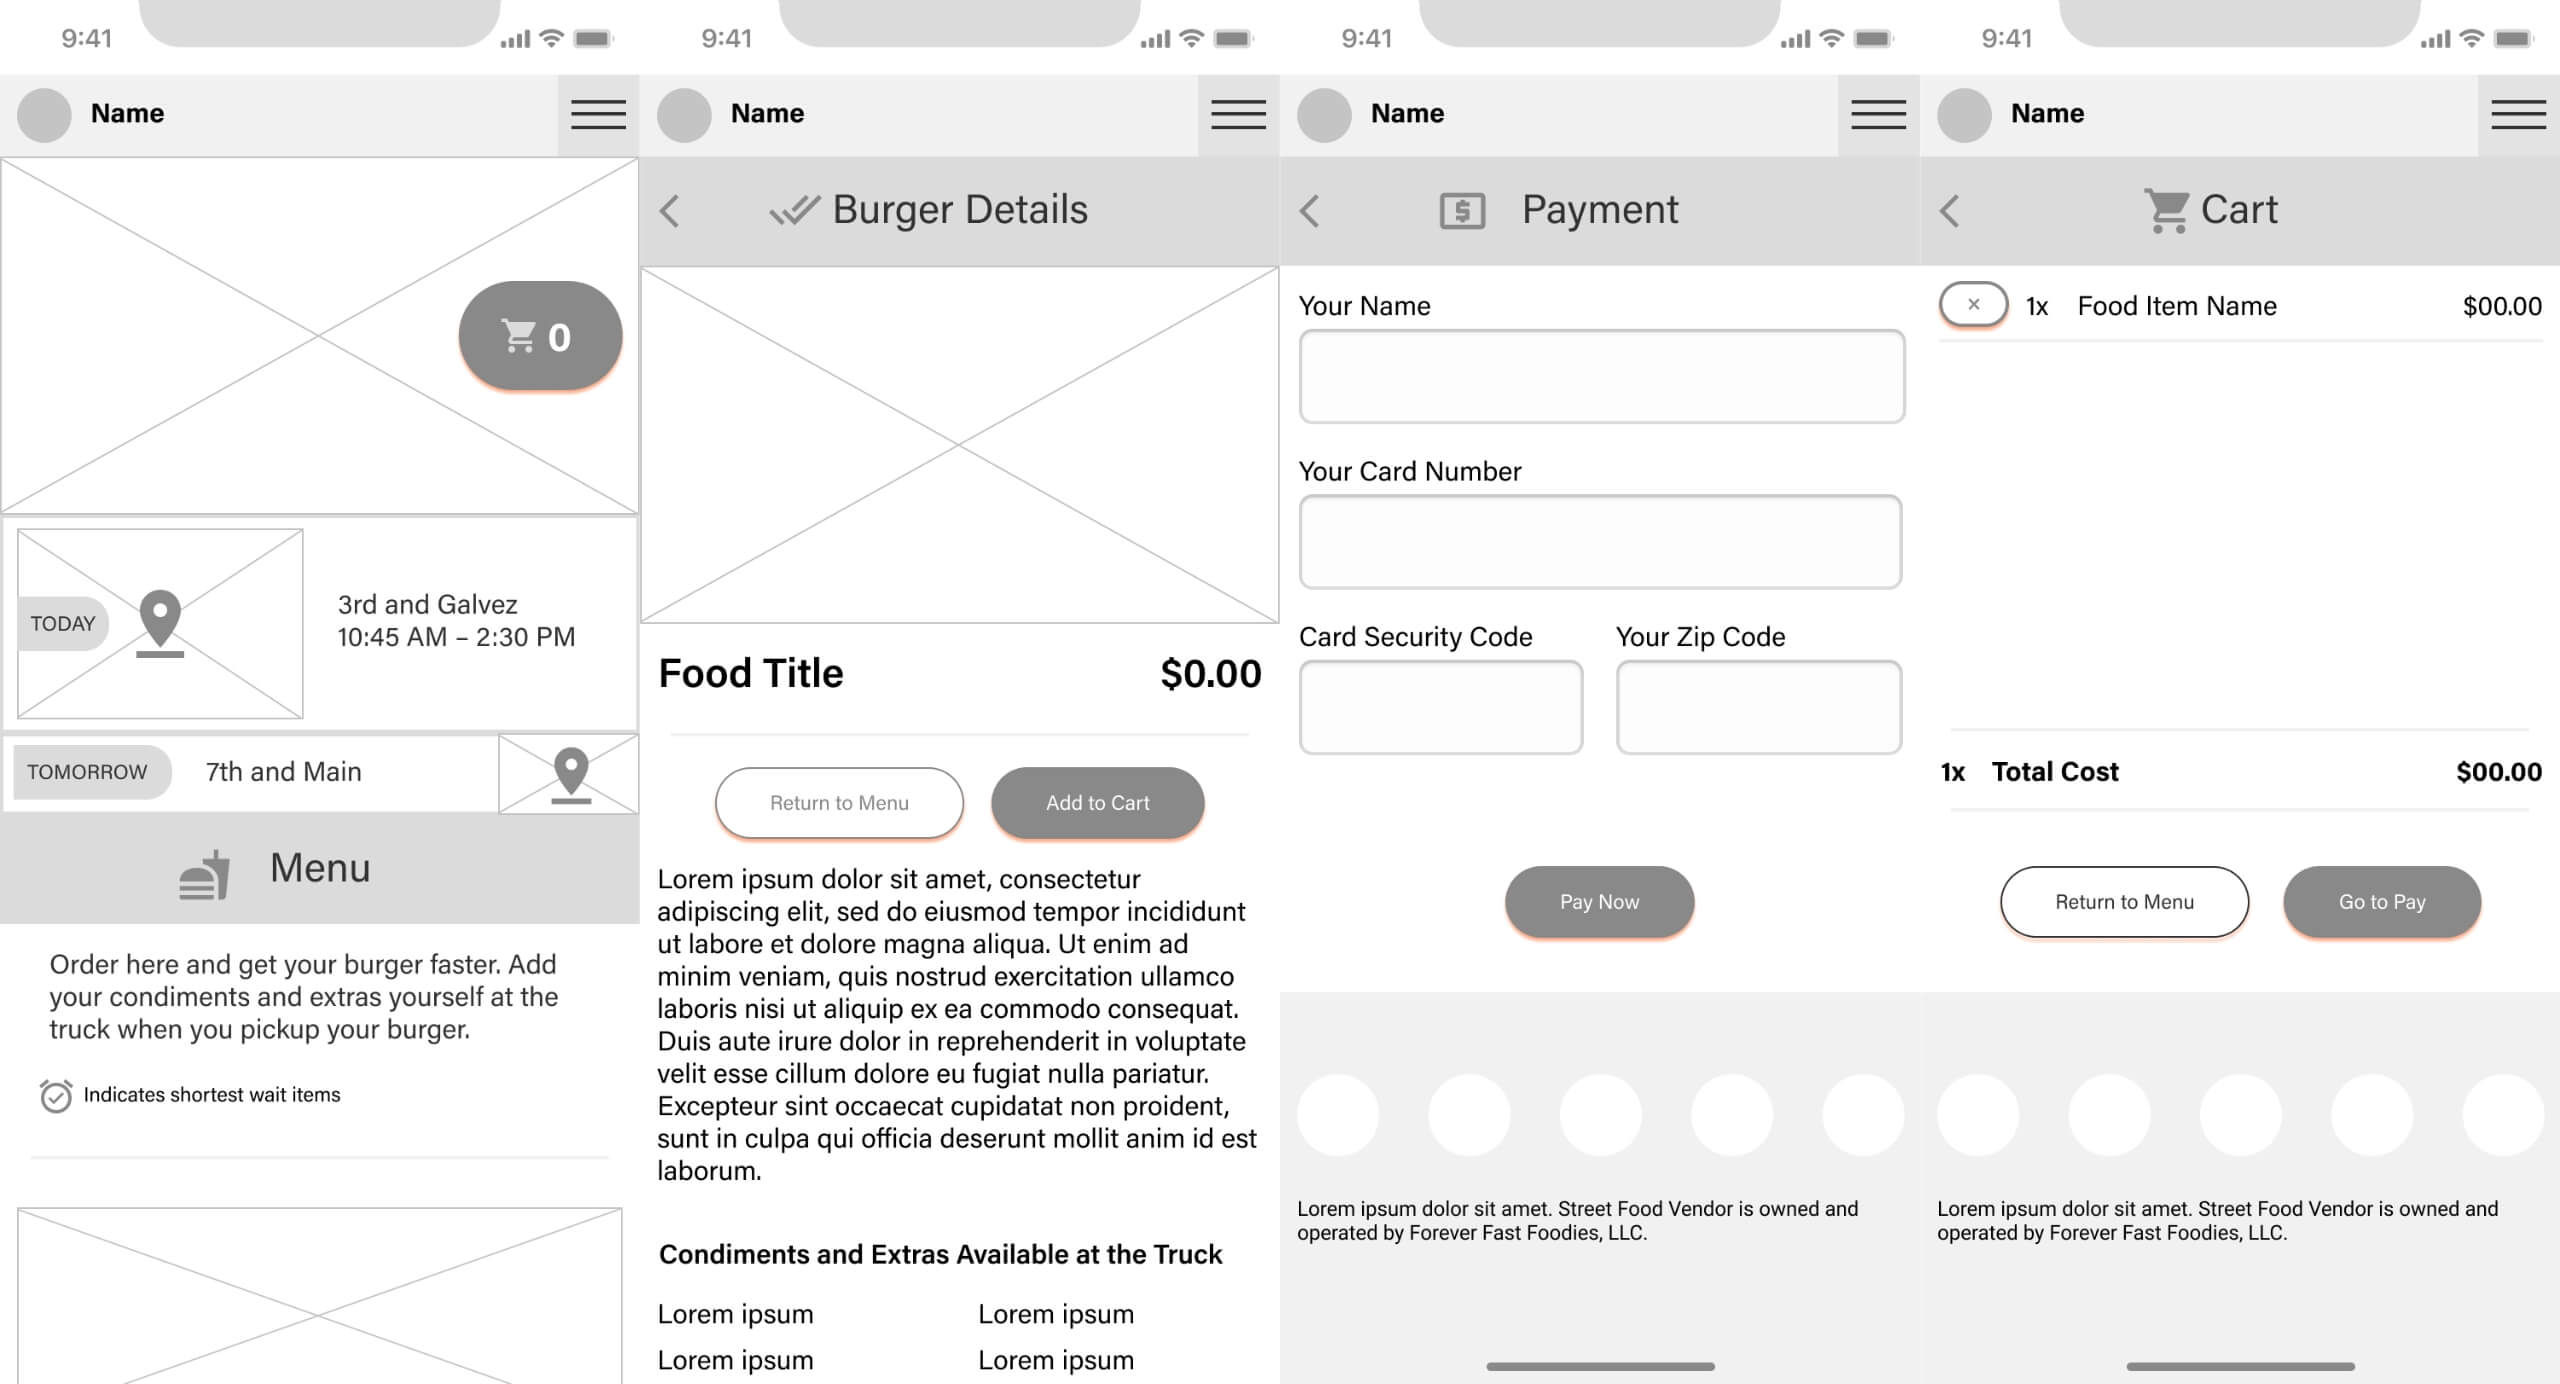 Digital wireframes for the iPhone size screens for home, food details, payment, and shopping cart screens.